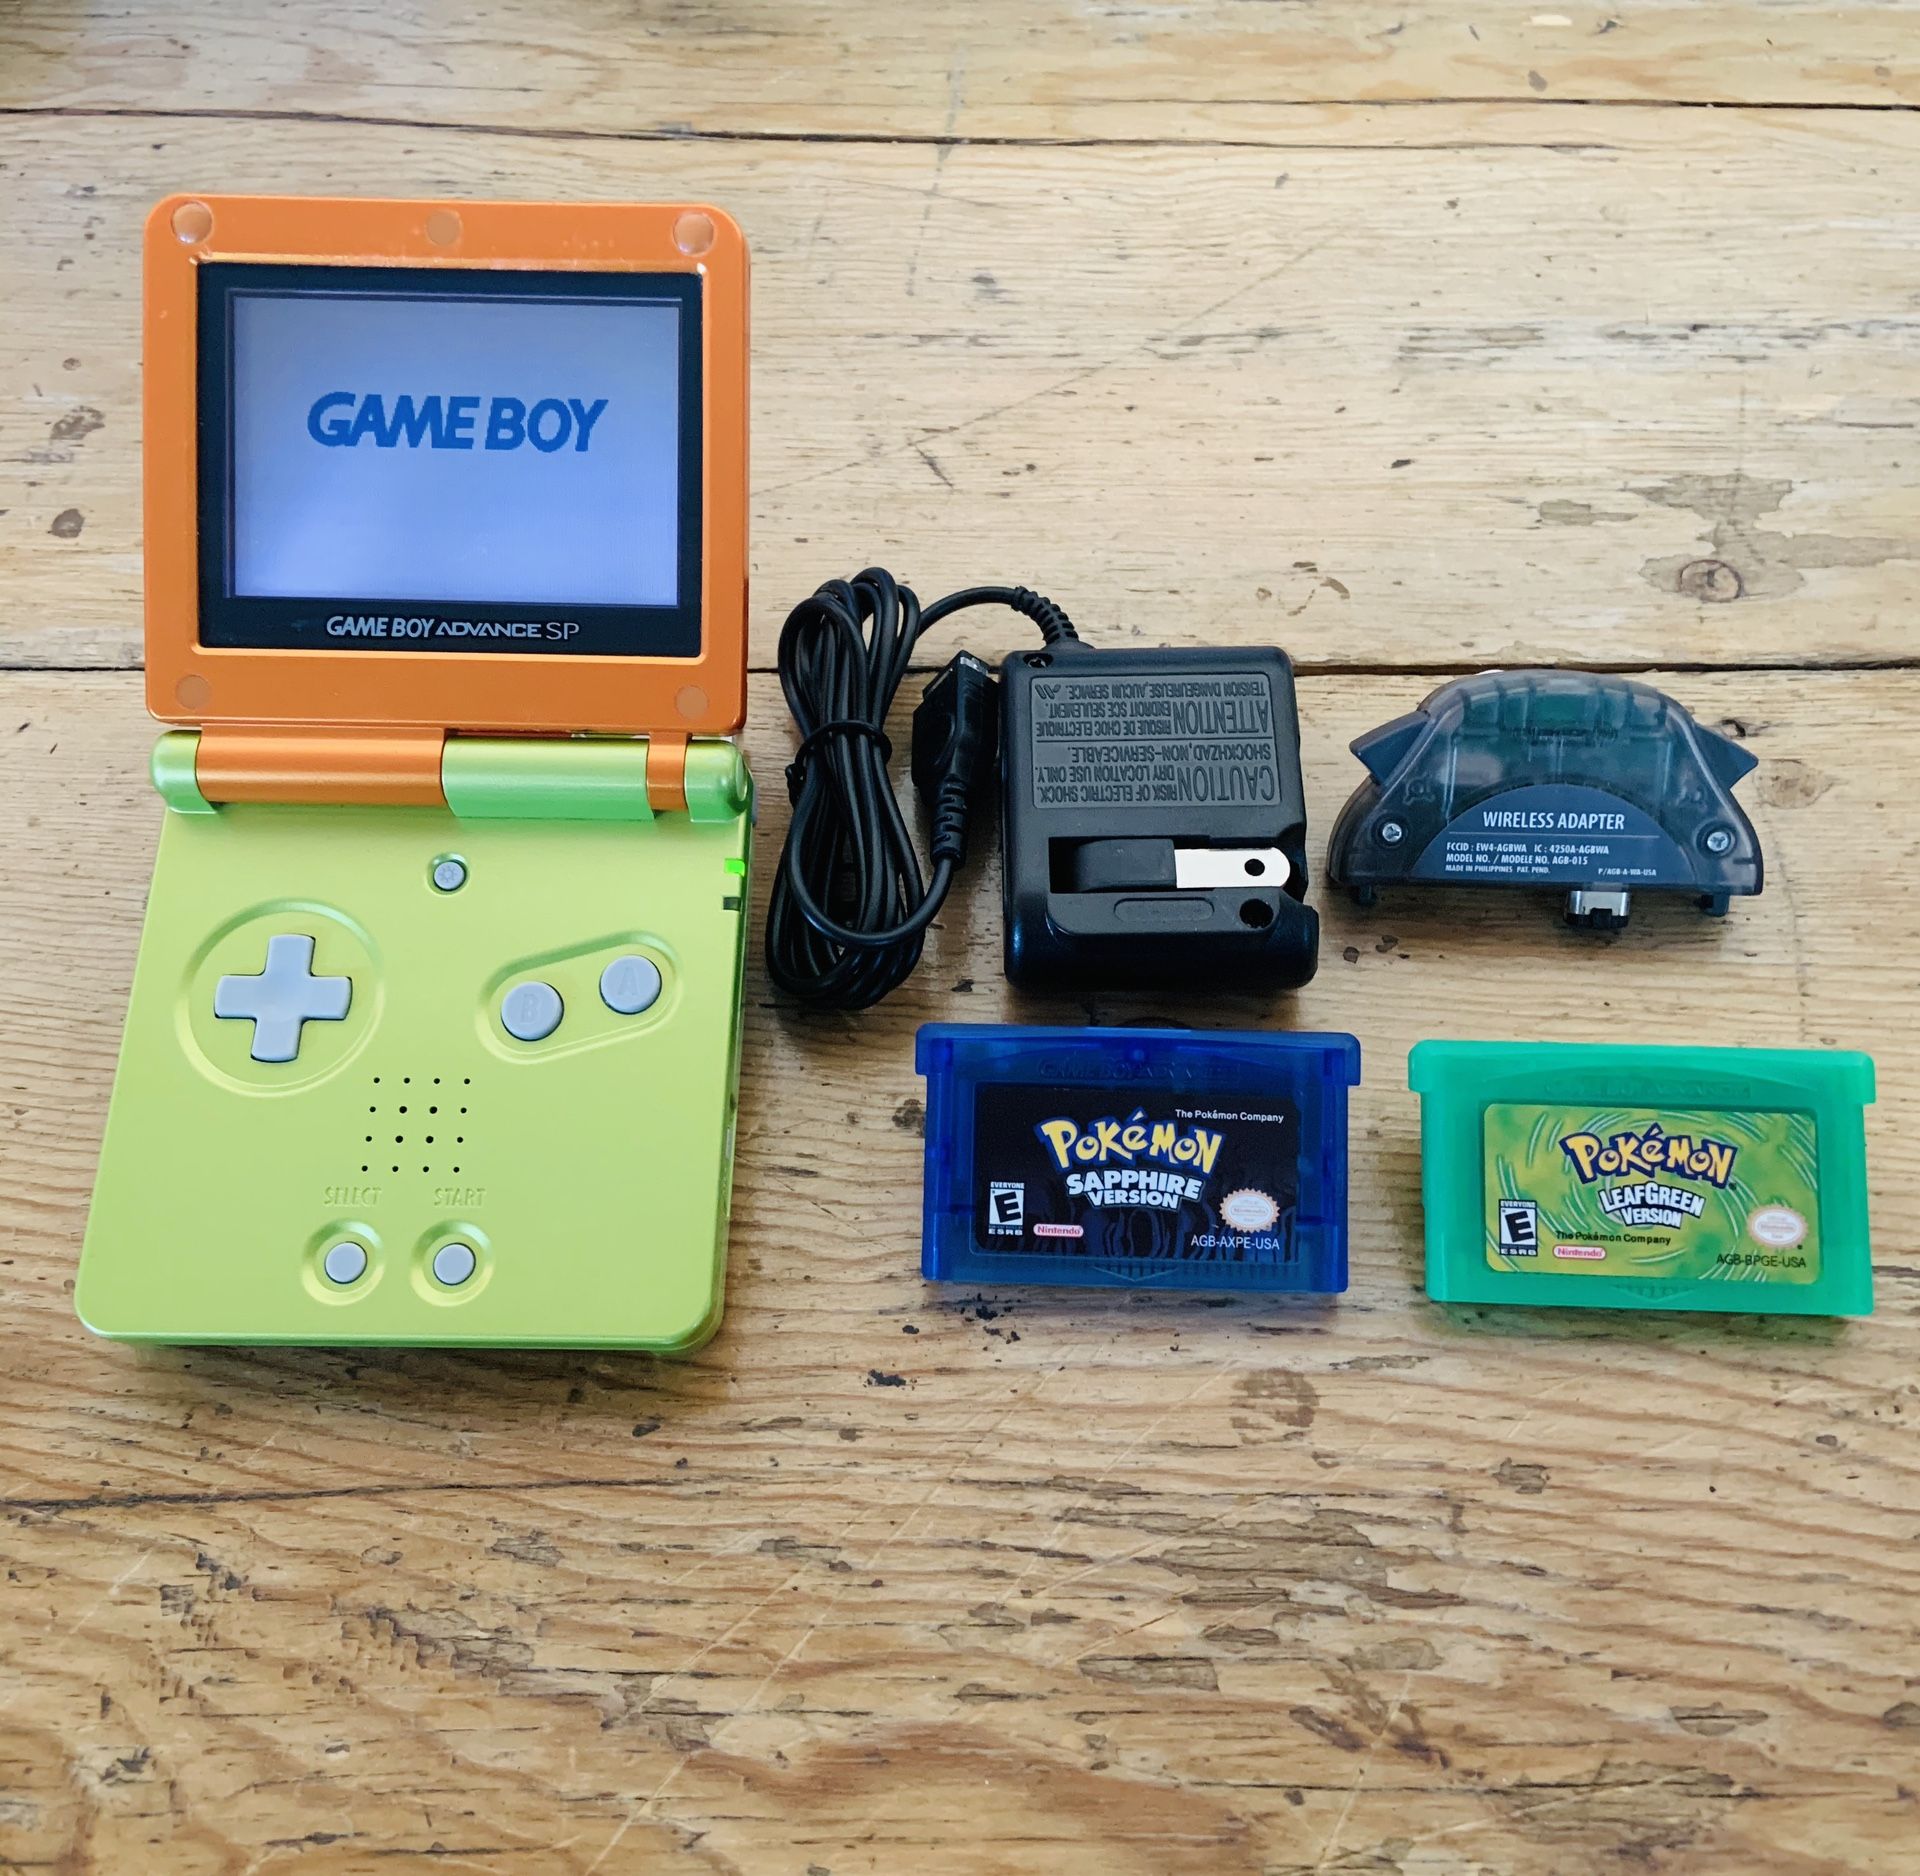 Gameboy Advance SP w/ Pokémon Leaf Green & Sapphire + Wall Charger